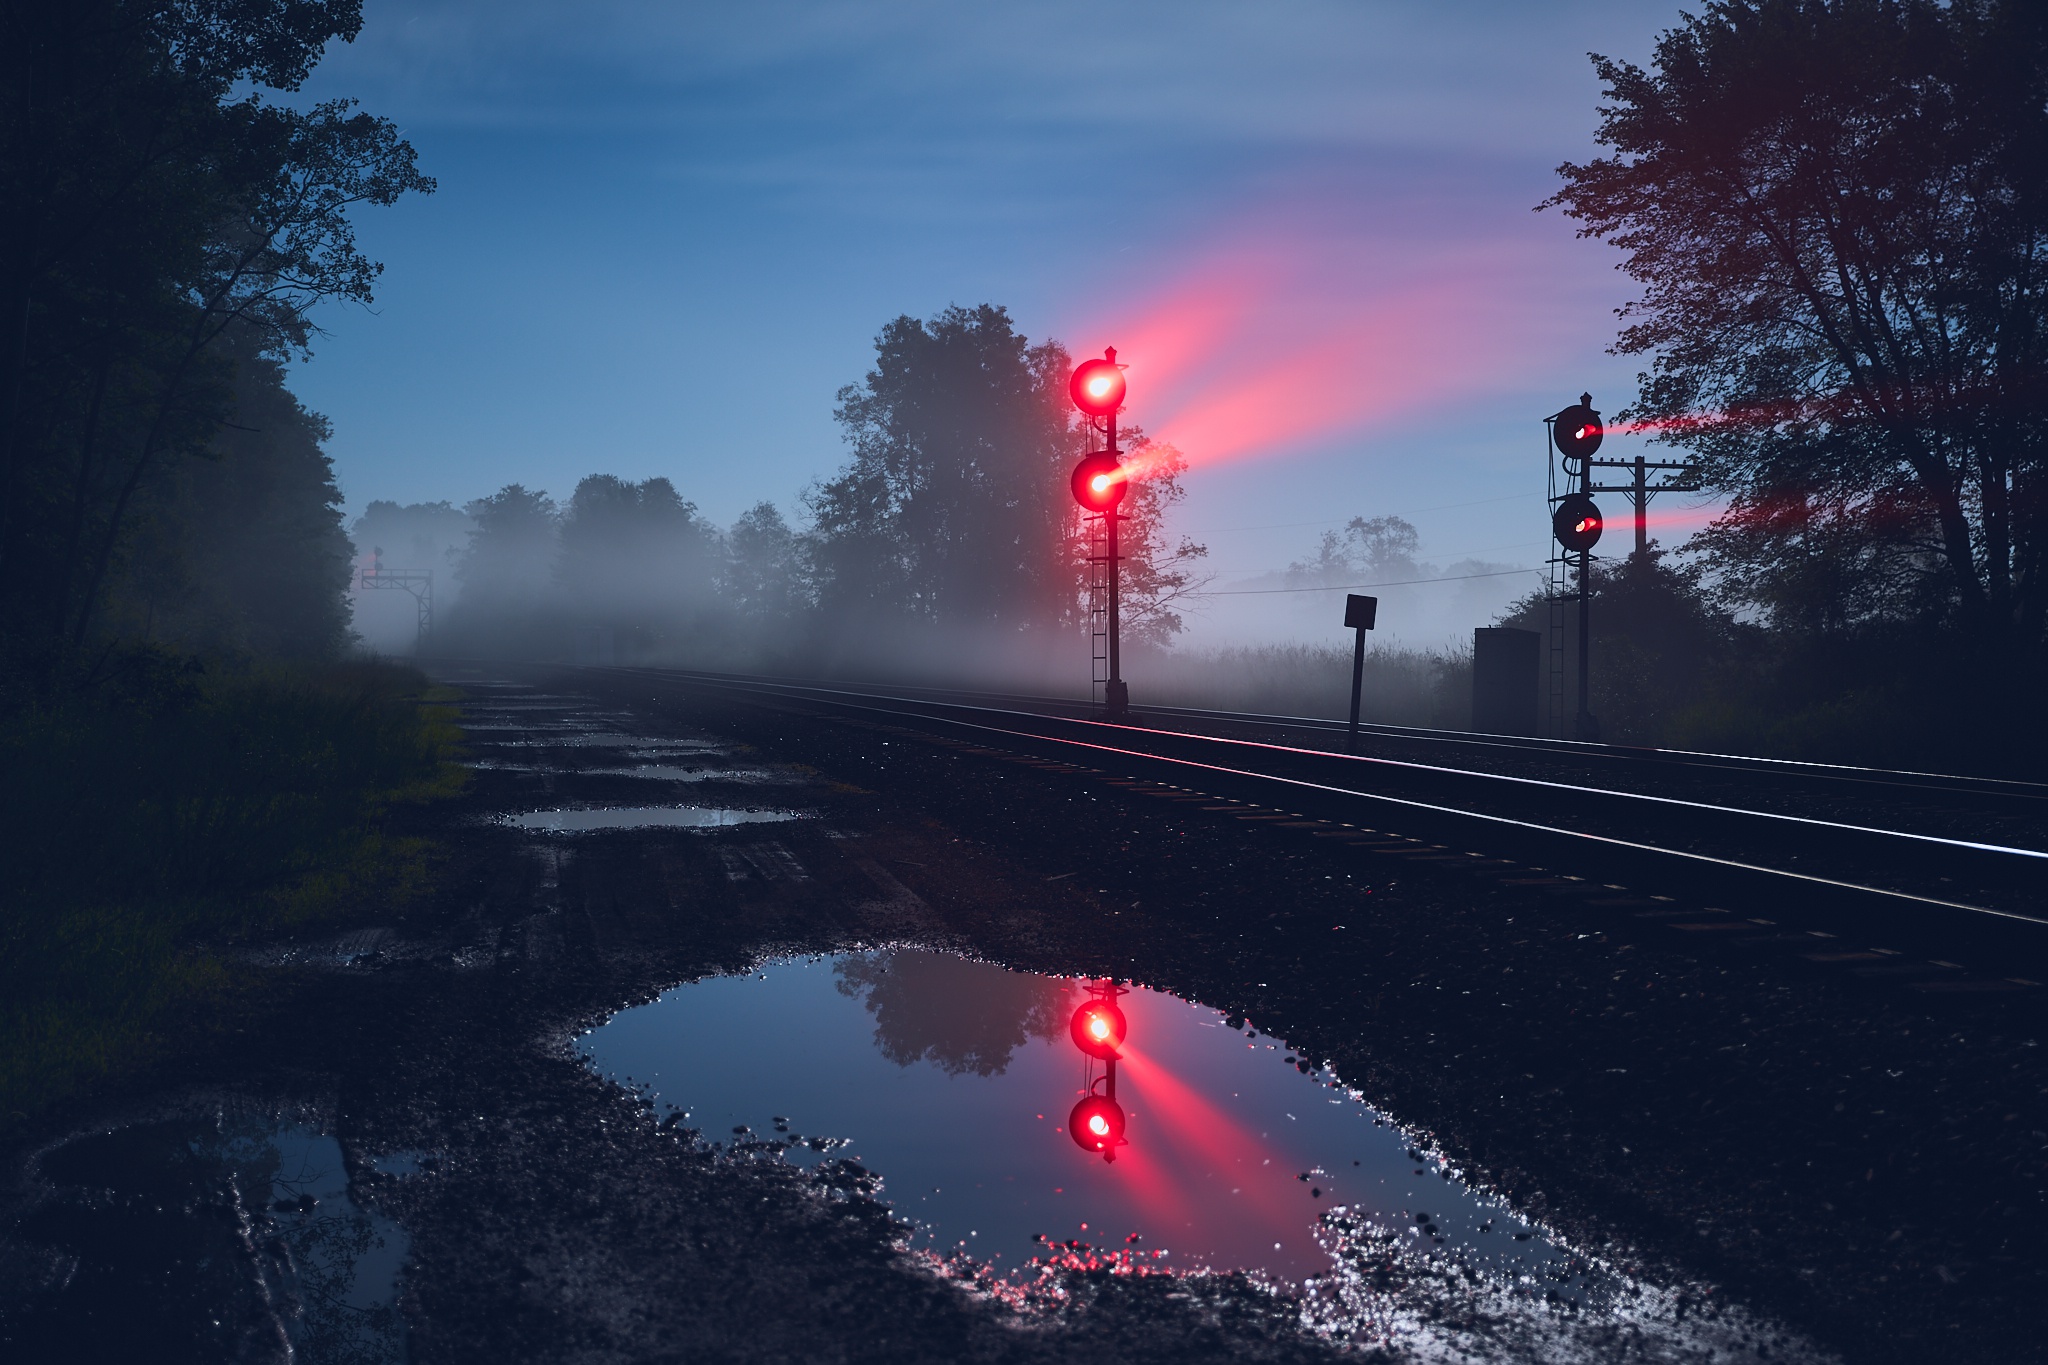 General 2048x1365 outdoors reflection railway night puddle mist dirt road